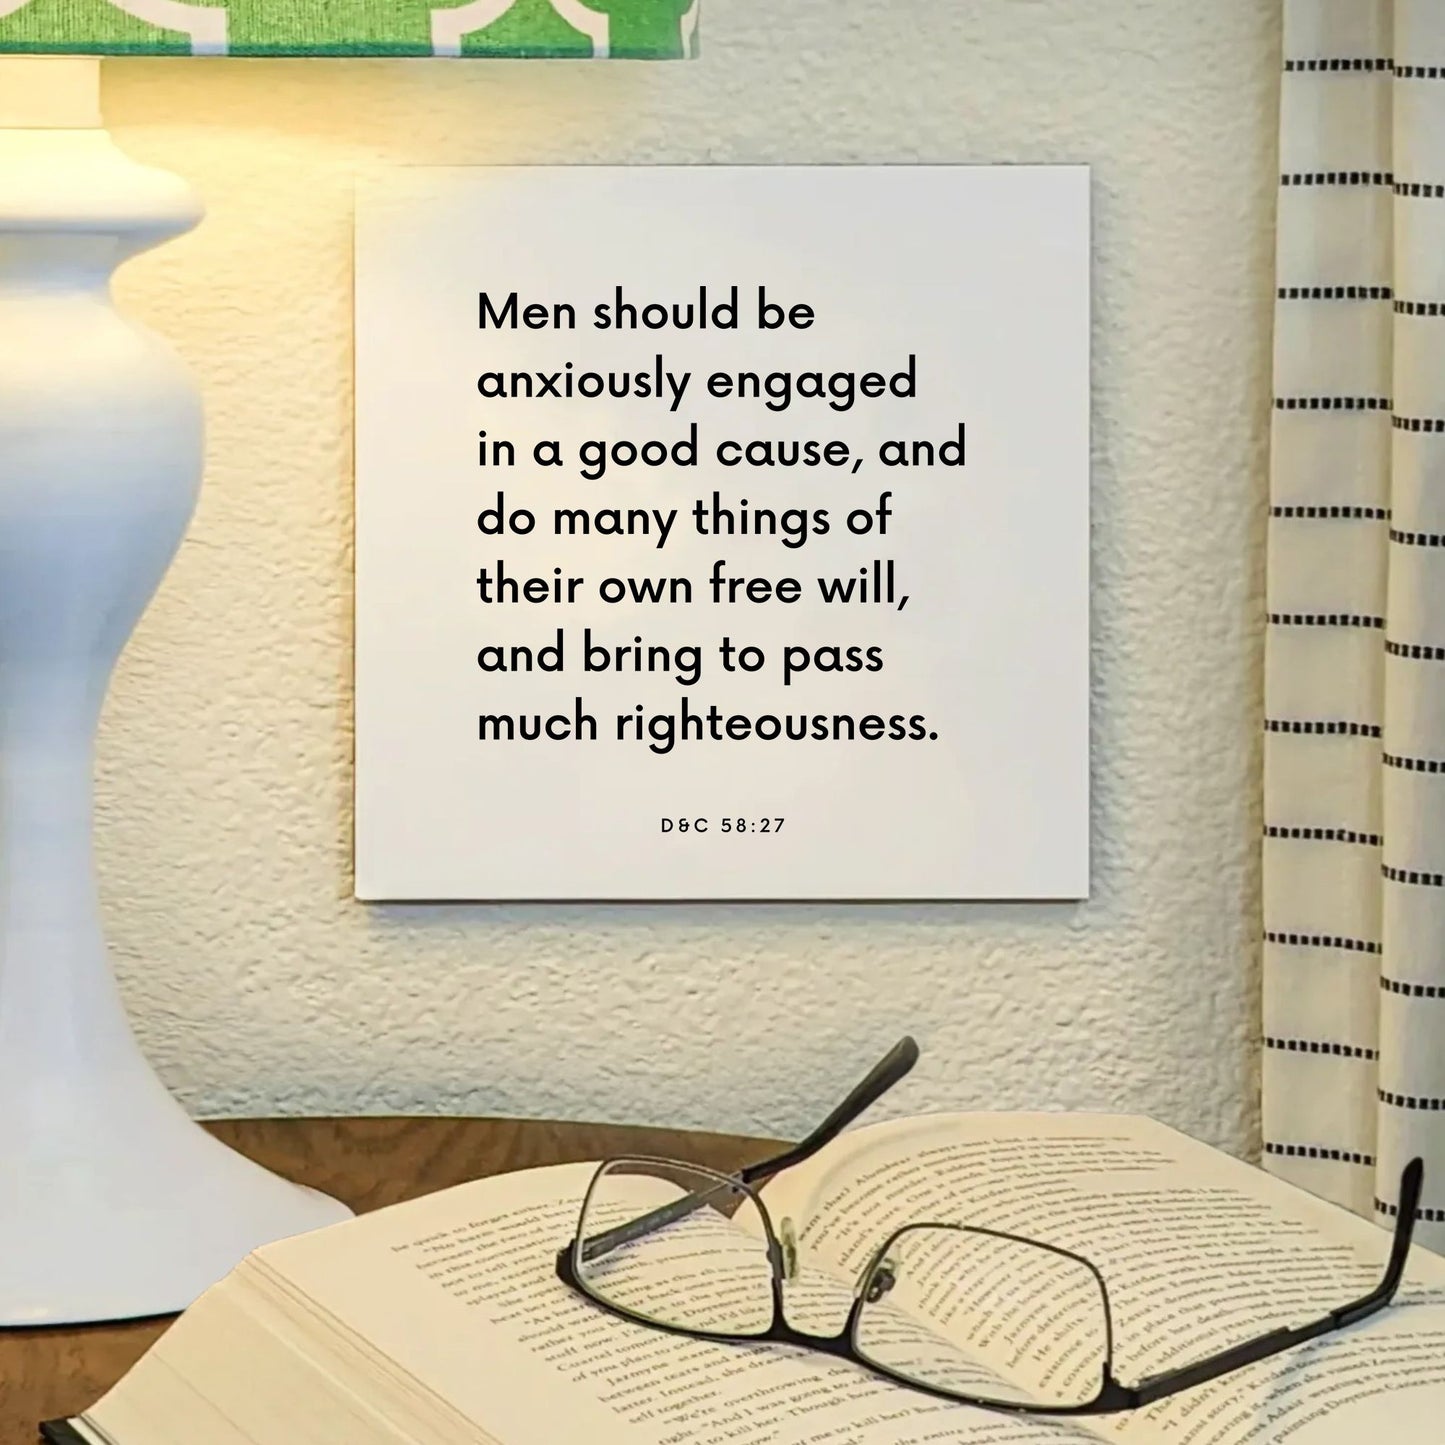 Lamp mouting of the scripture tile for D&C 58:27 - "Men should be anxiously engaged in a good cause"